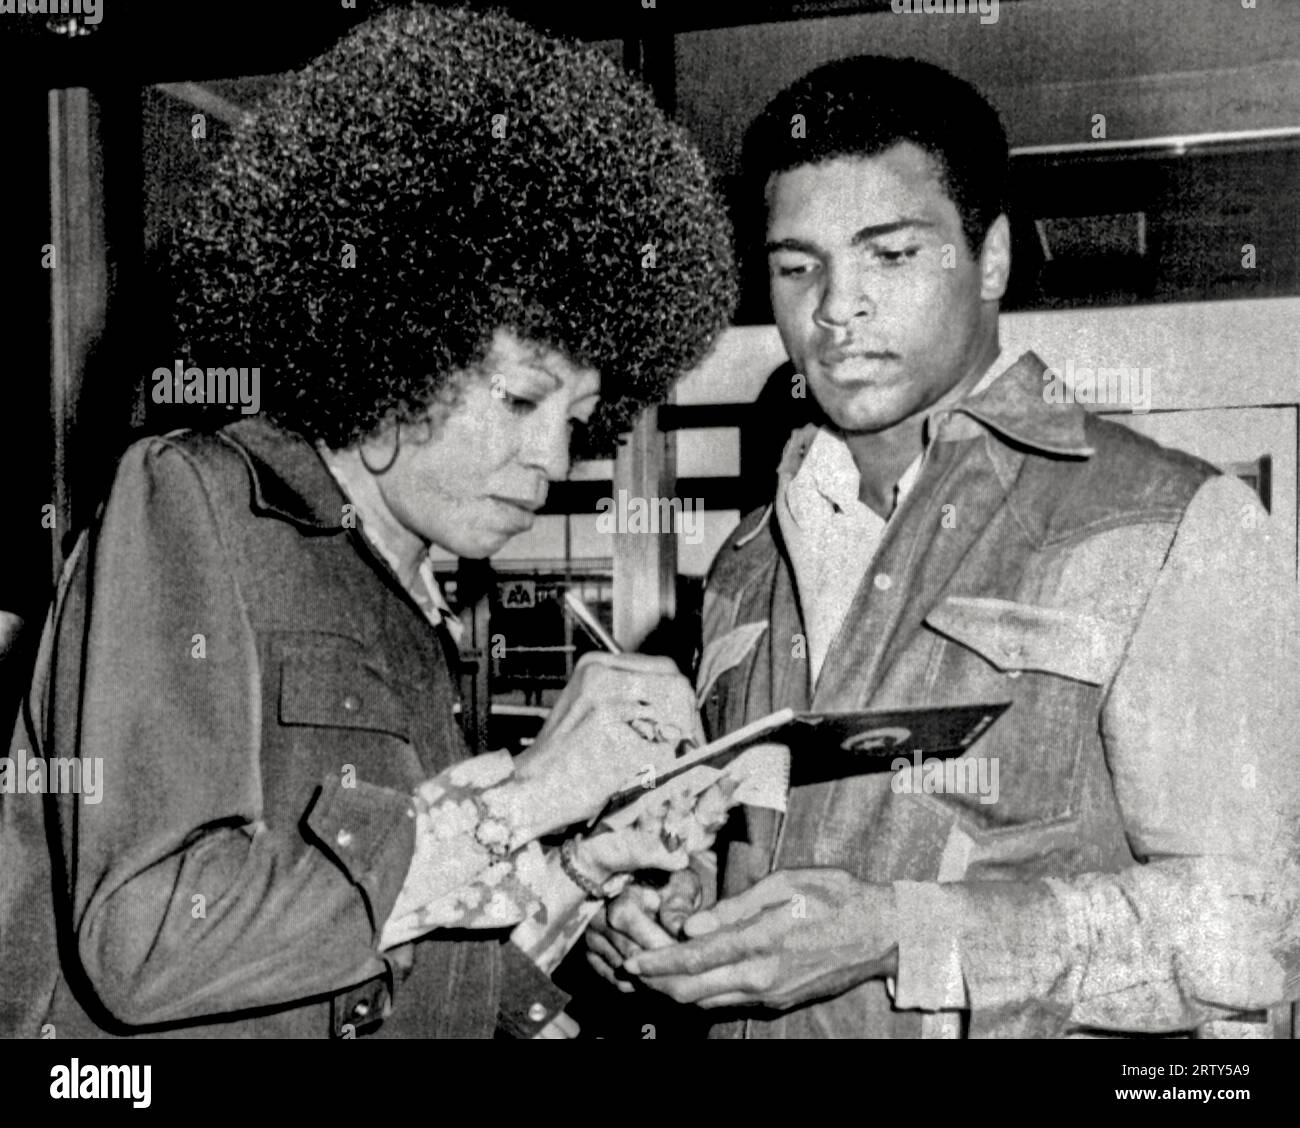 New York, New York  September 9, 1974 Muhammad Ali and Angela Davis exchange autographs when they run into each other at La Guardia Airport. Ali was on his way to Zaire to fight George Foreman, Stock Photo